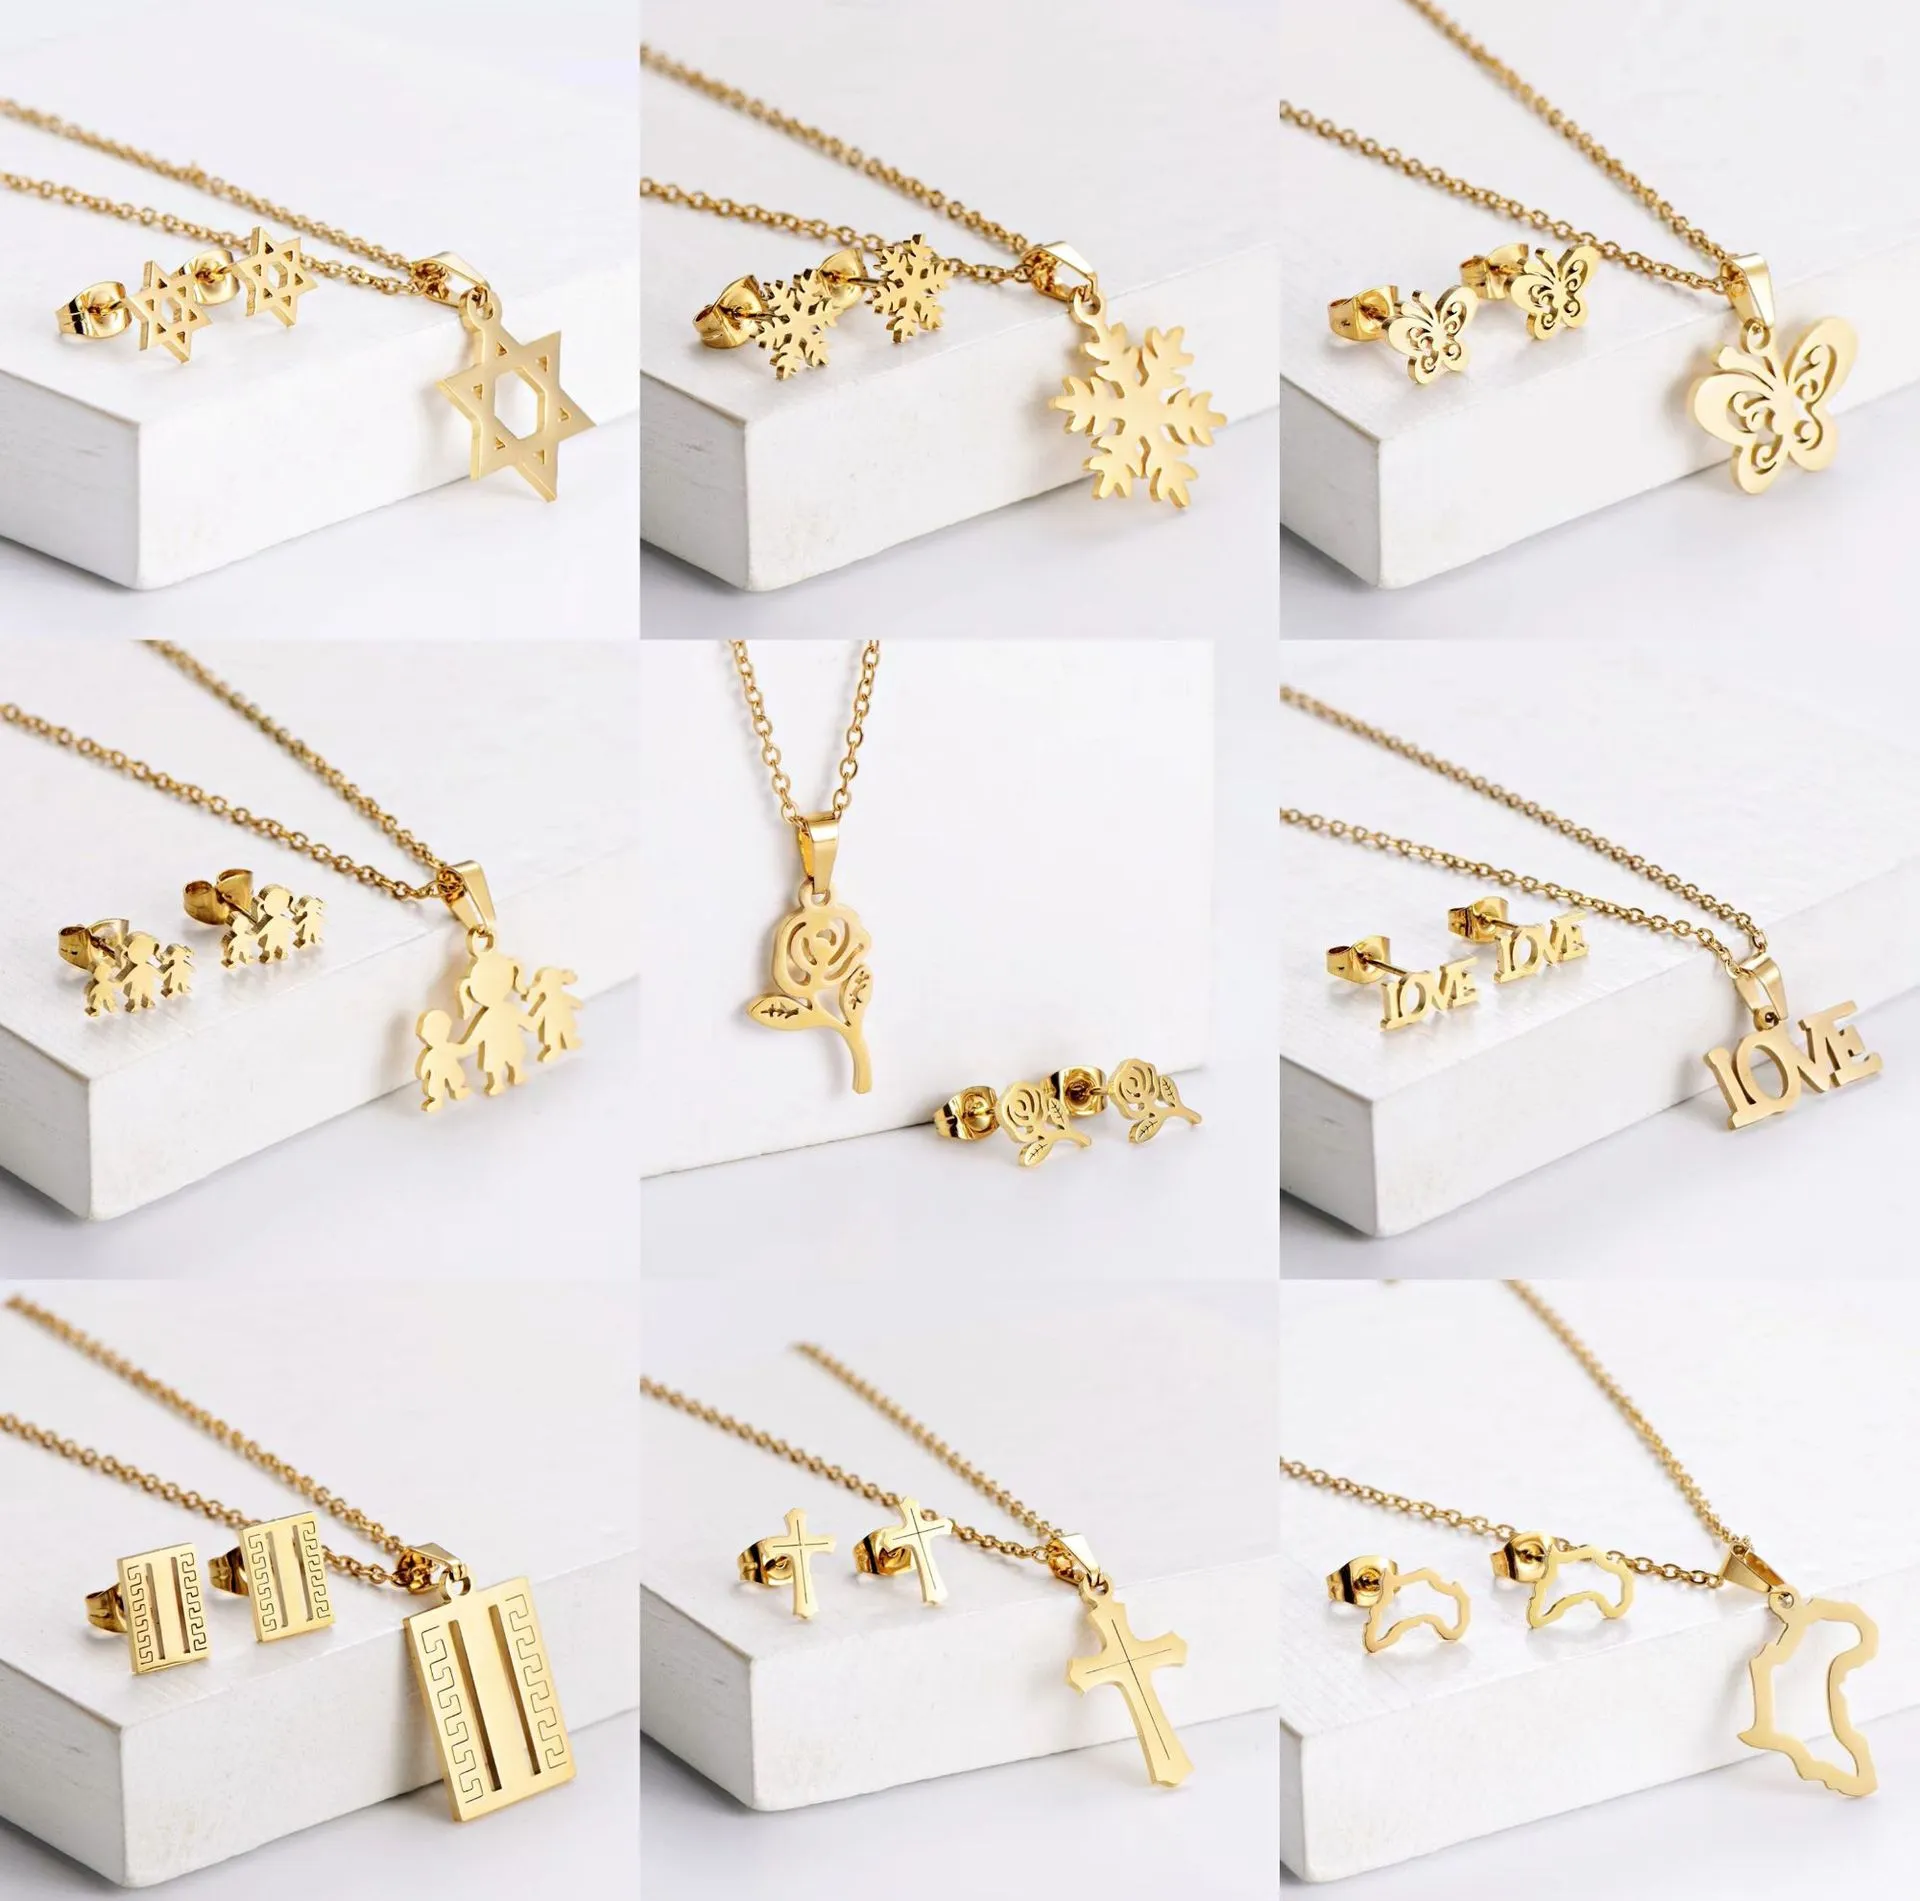 2023 stainless steel fashion jewelry set minimalist 18k gold heart butterfly chokers necklaces and earrings set for gift